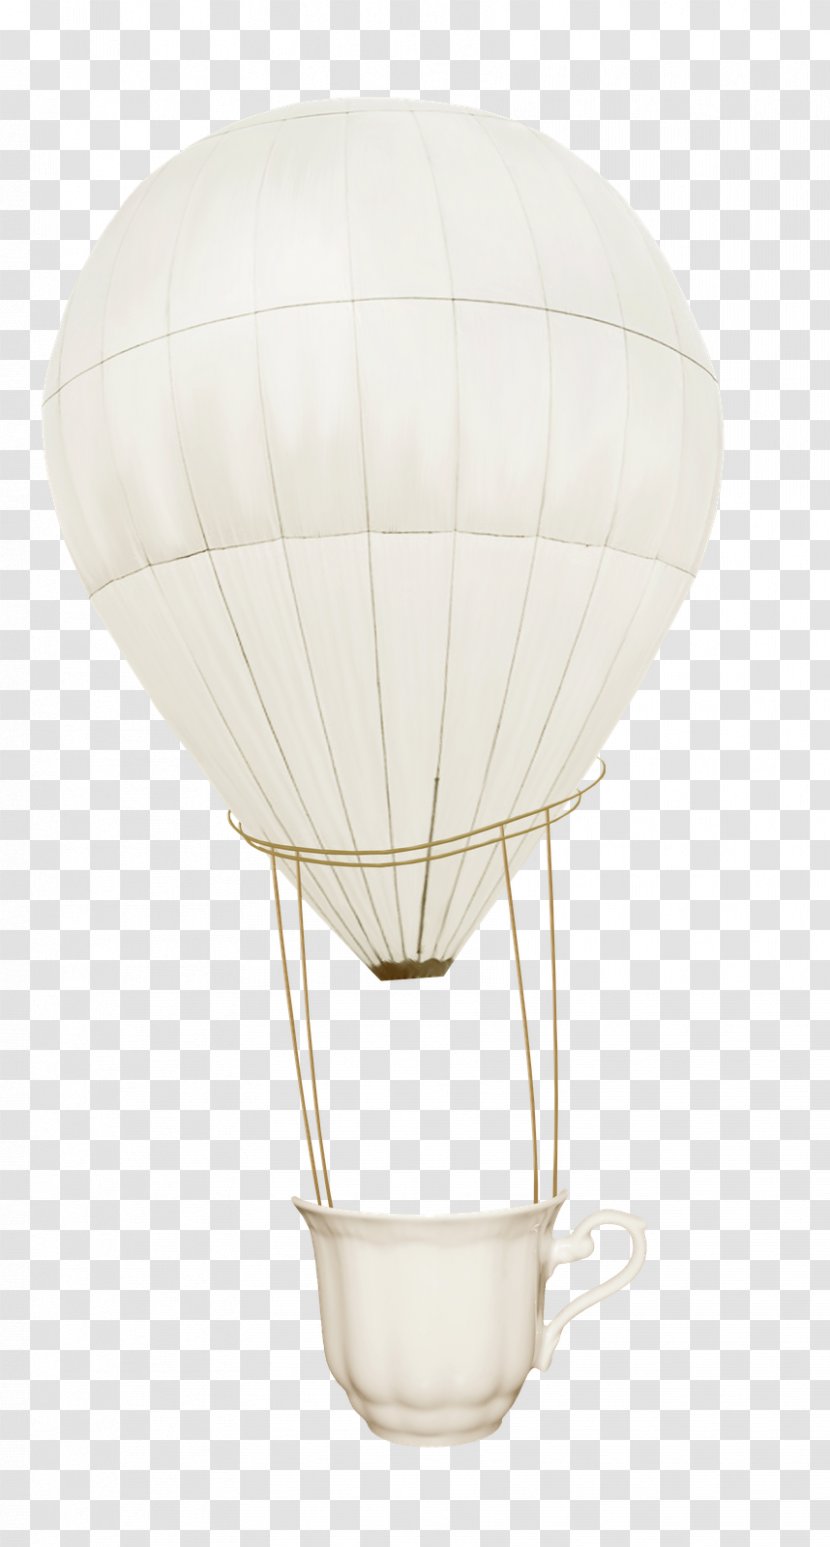 Hot Air Balloon Lighting - Hand-painted Balloons Transparent PNG